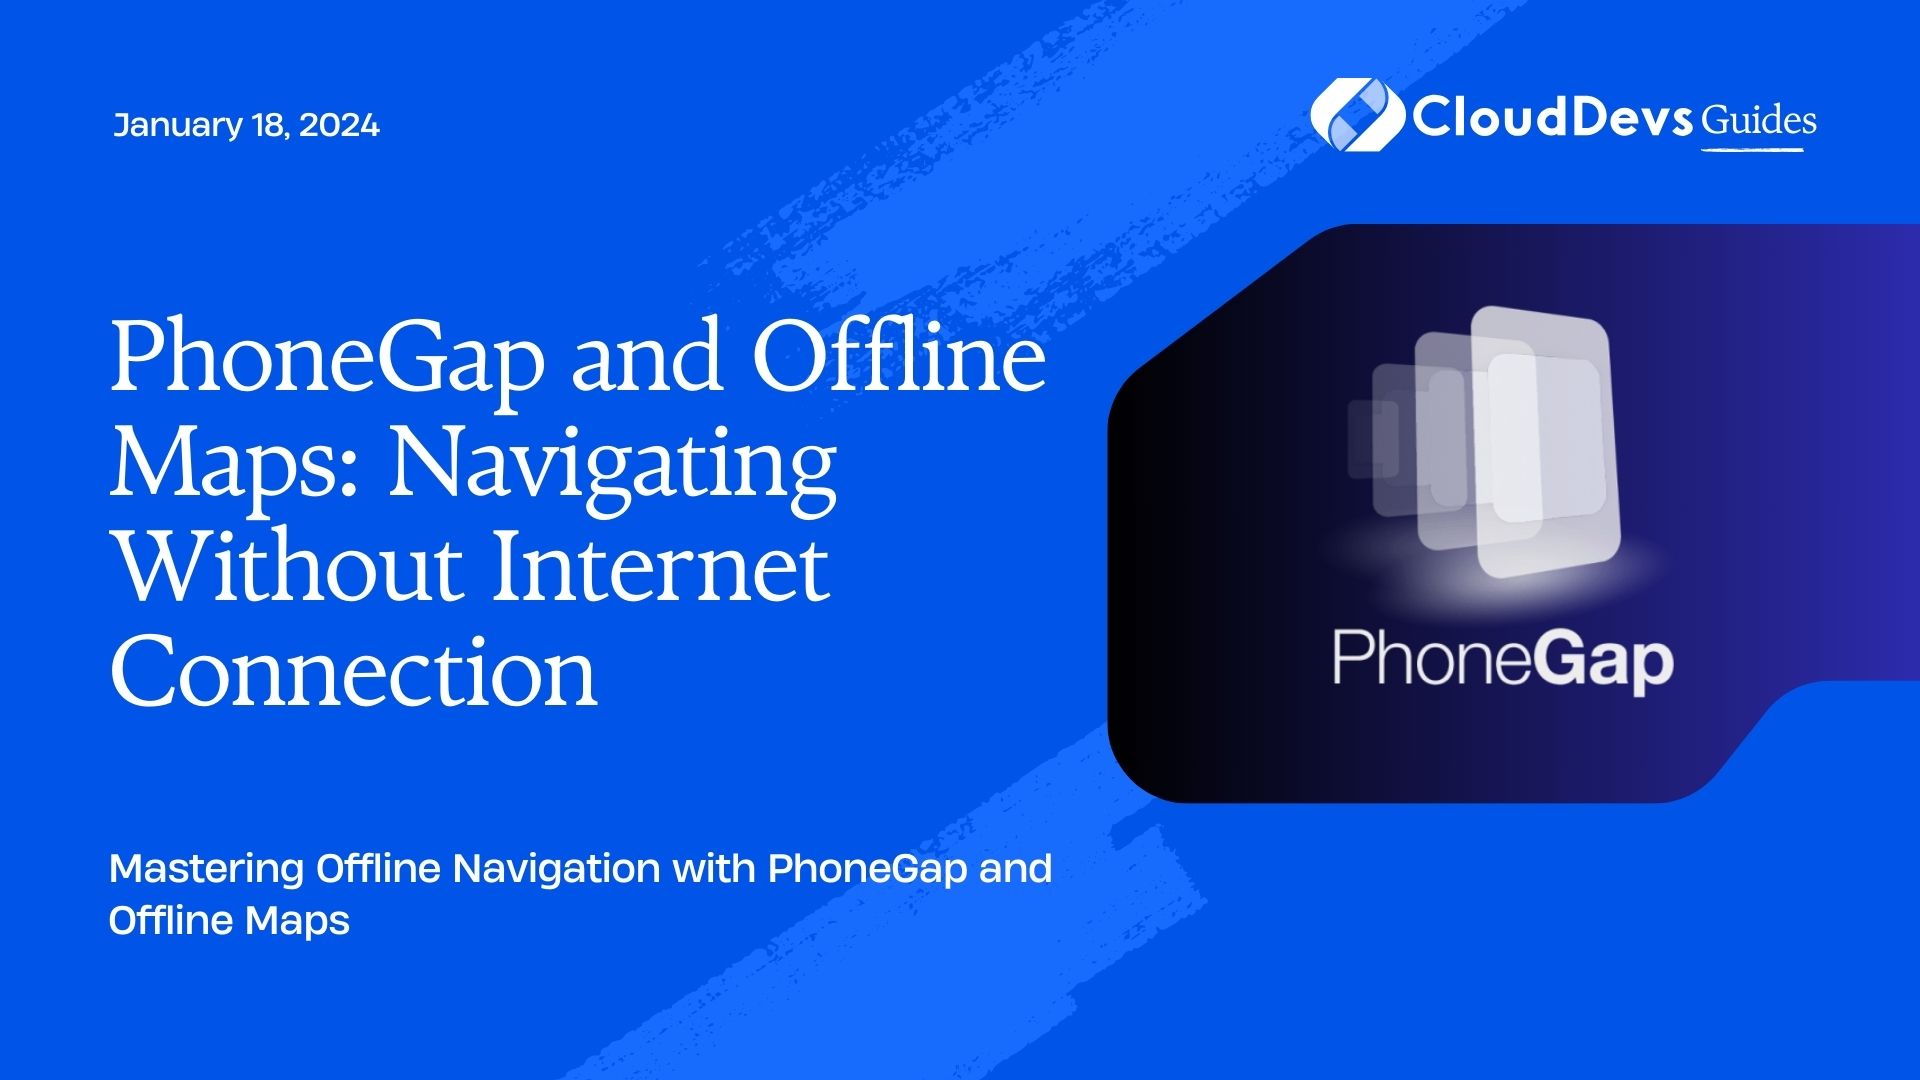 PhoneGap and Offline Maps: Navigating Without Internet Connection